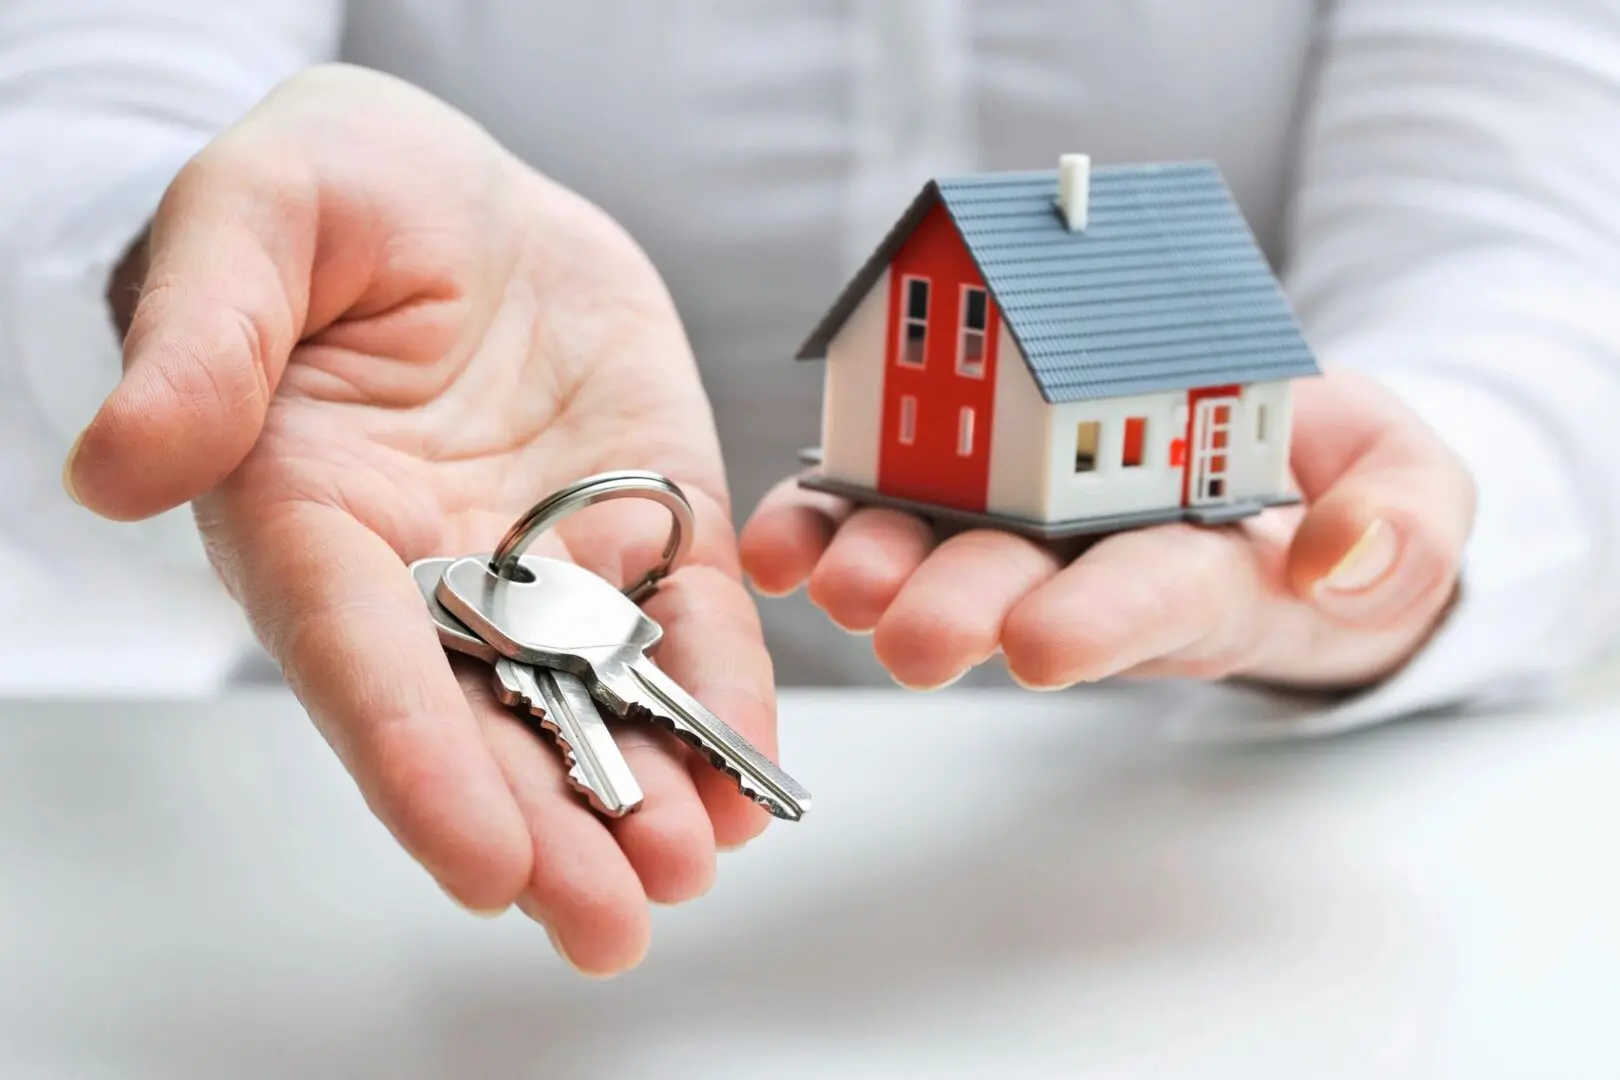 Man is standing with a small house and keys in his hands